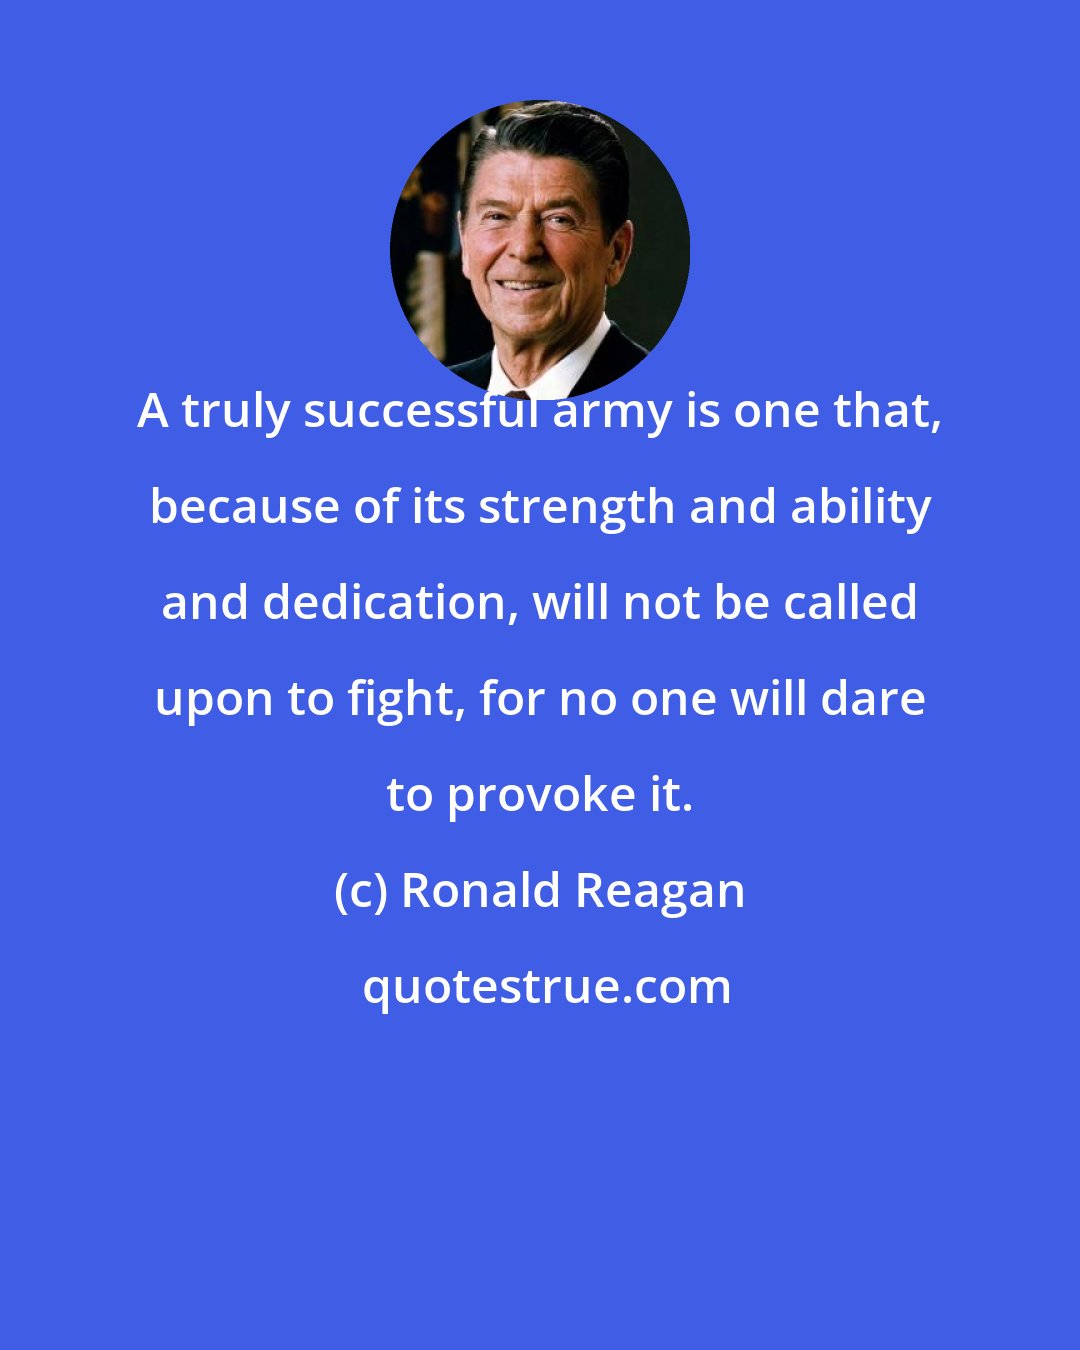 Ronald Reagan: A truly successful army is one that, because of its strength and ability and dedication, will not be called upon to fight, for no one will dare to provoke it.